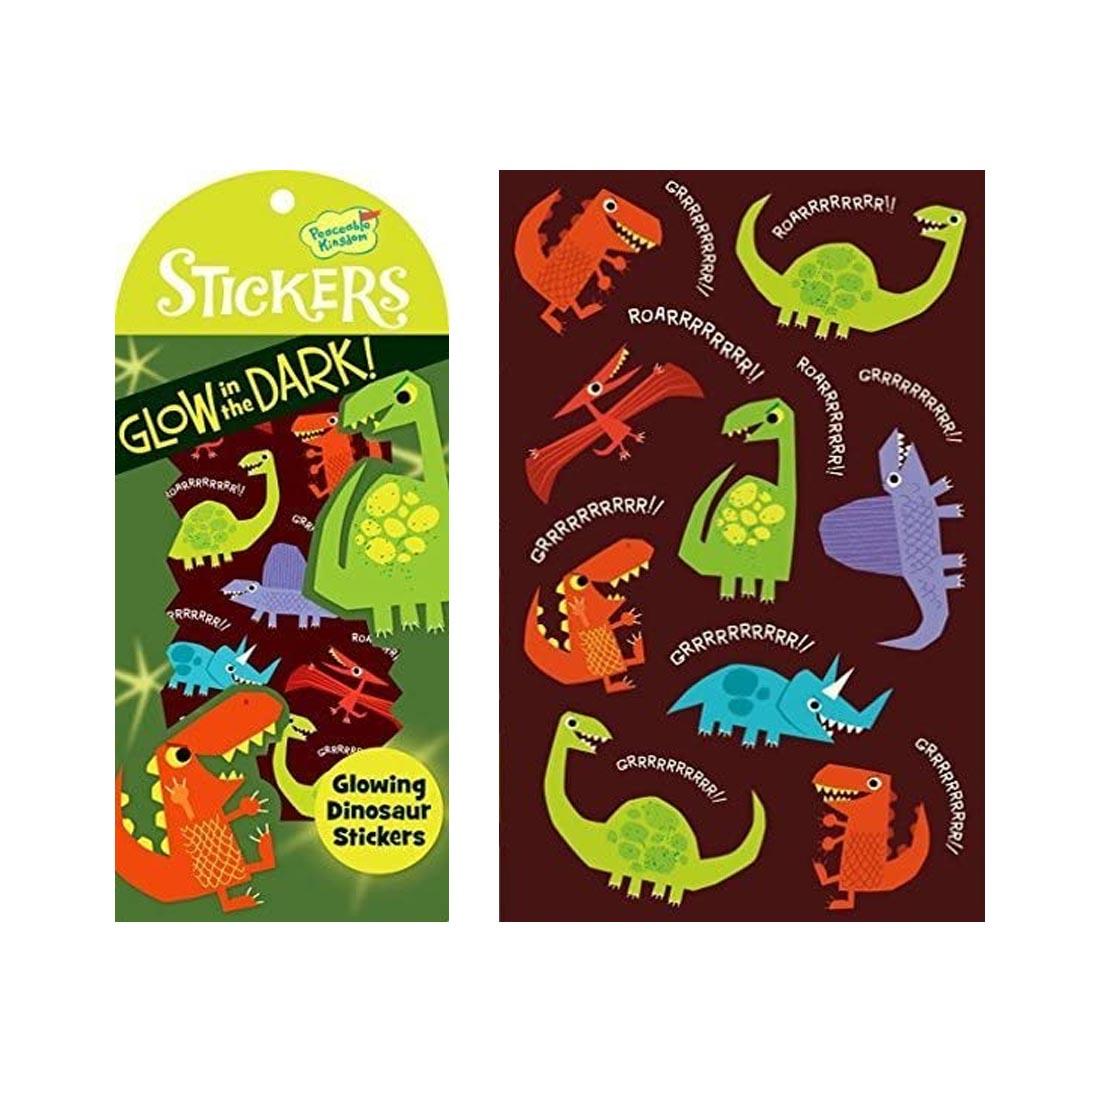 Glow-in-the-Dark Glowing Dinosaurs Stickers by Peaceable Kingdom